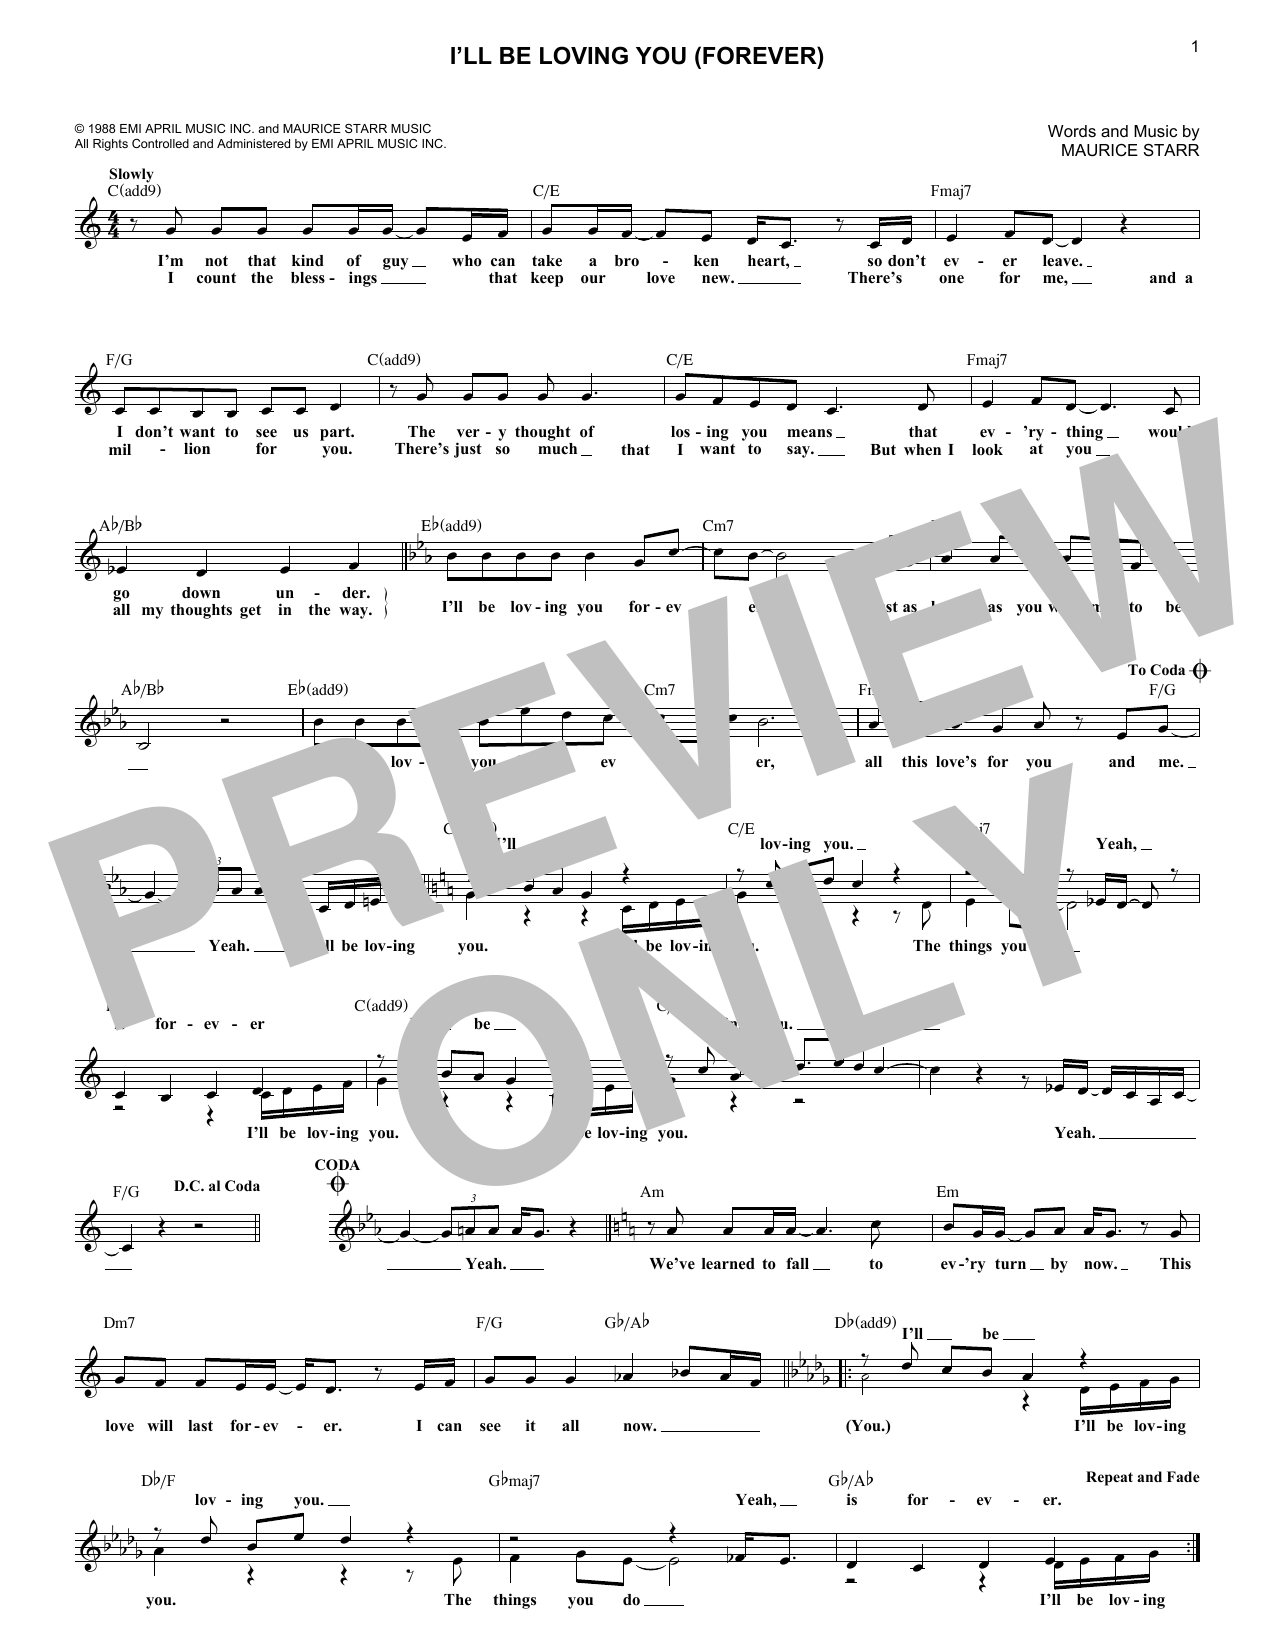 Download New Kids On The Block I'll Be Loving You (Forever) Sheet Music